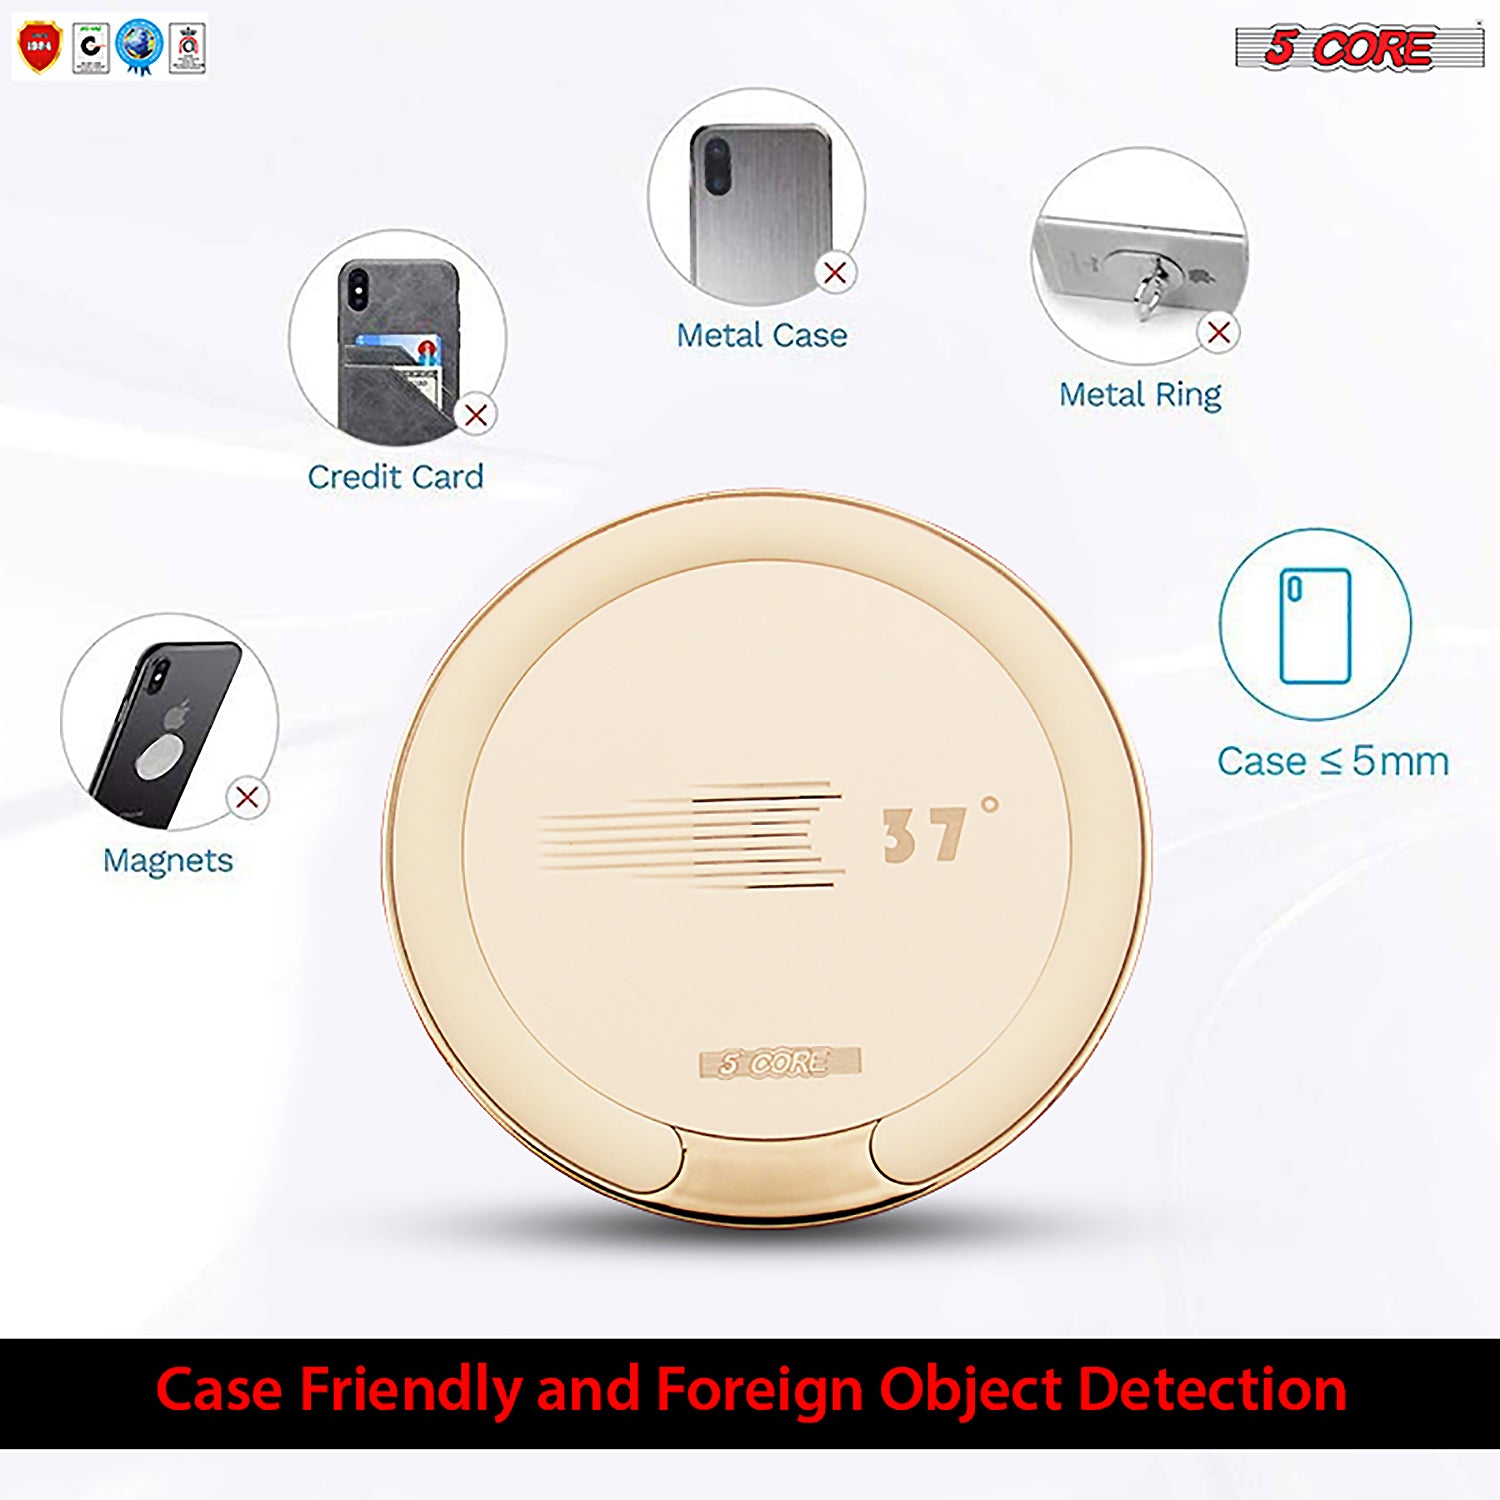 5 Core Wireless Charger Charging Station Fast QI Charging Pad w Upgraded Coil Case Friendly Wireless Samsung iPhone AirPod Fast Charging -CDKW04 W